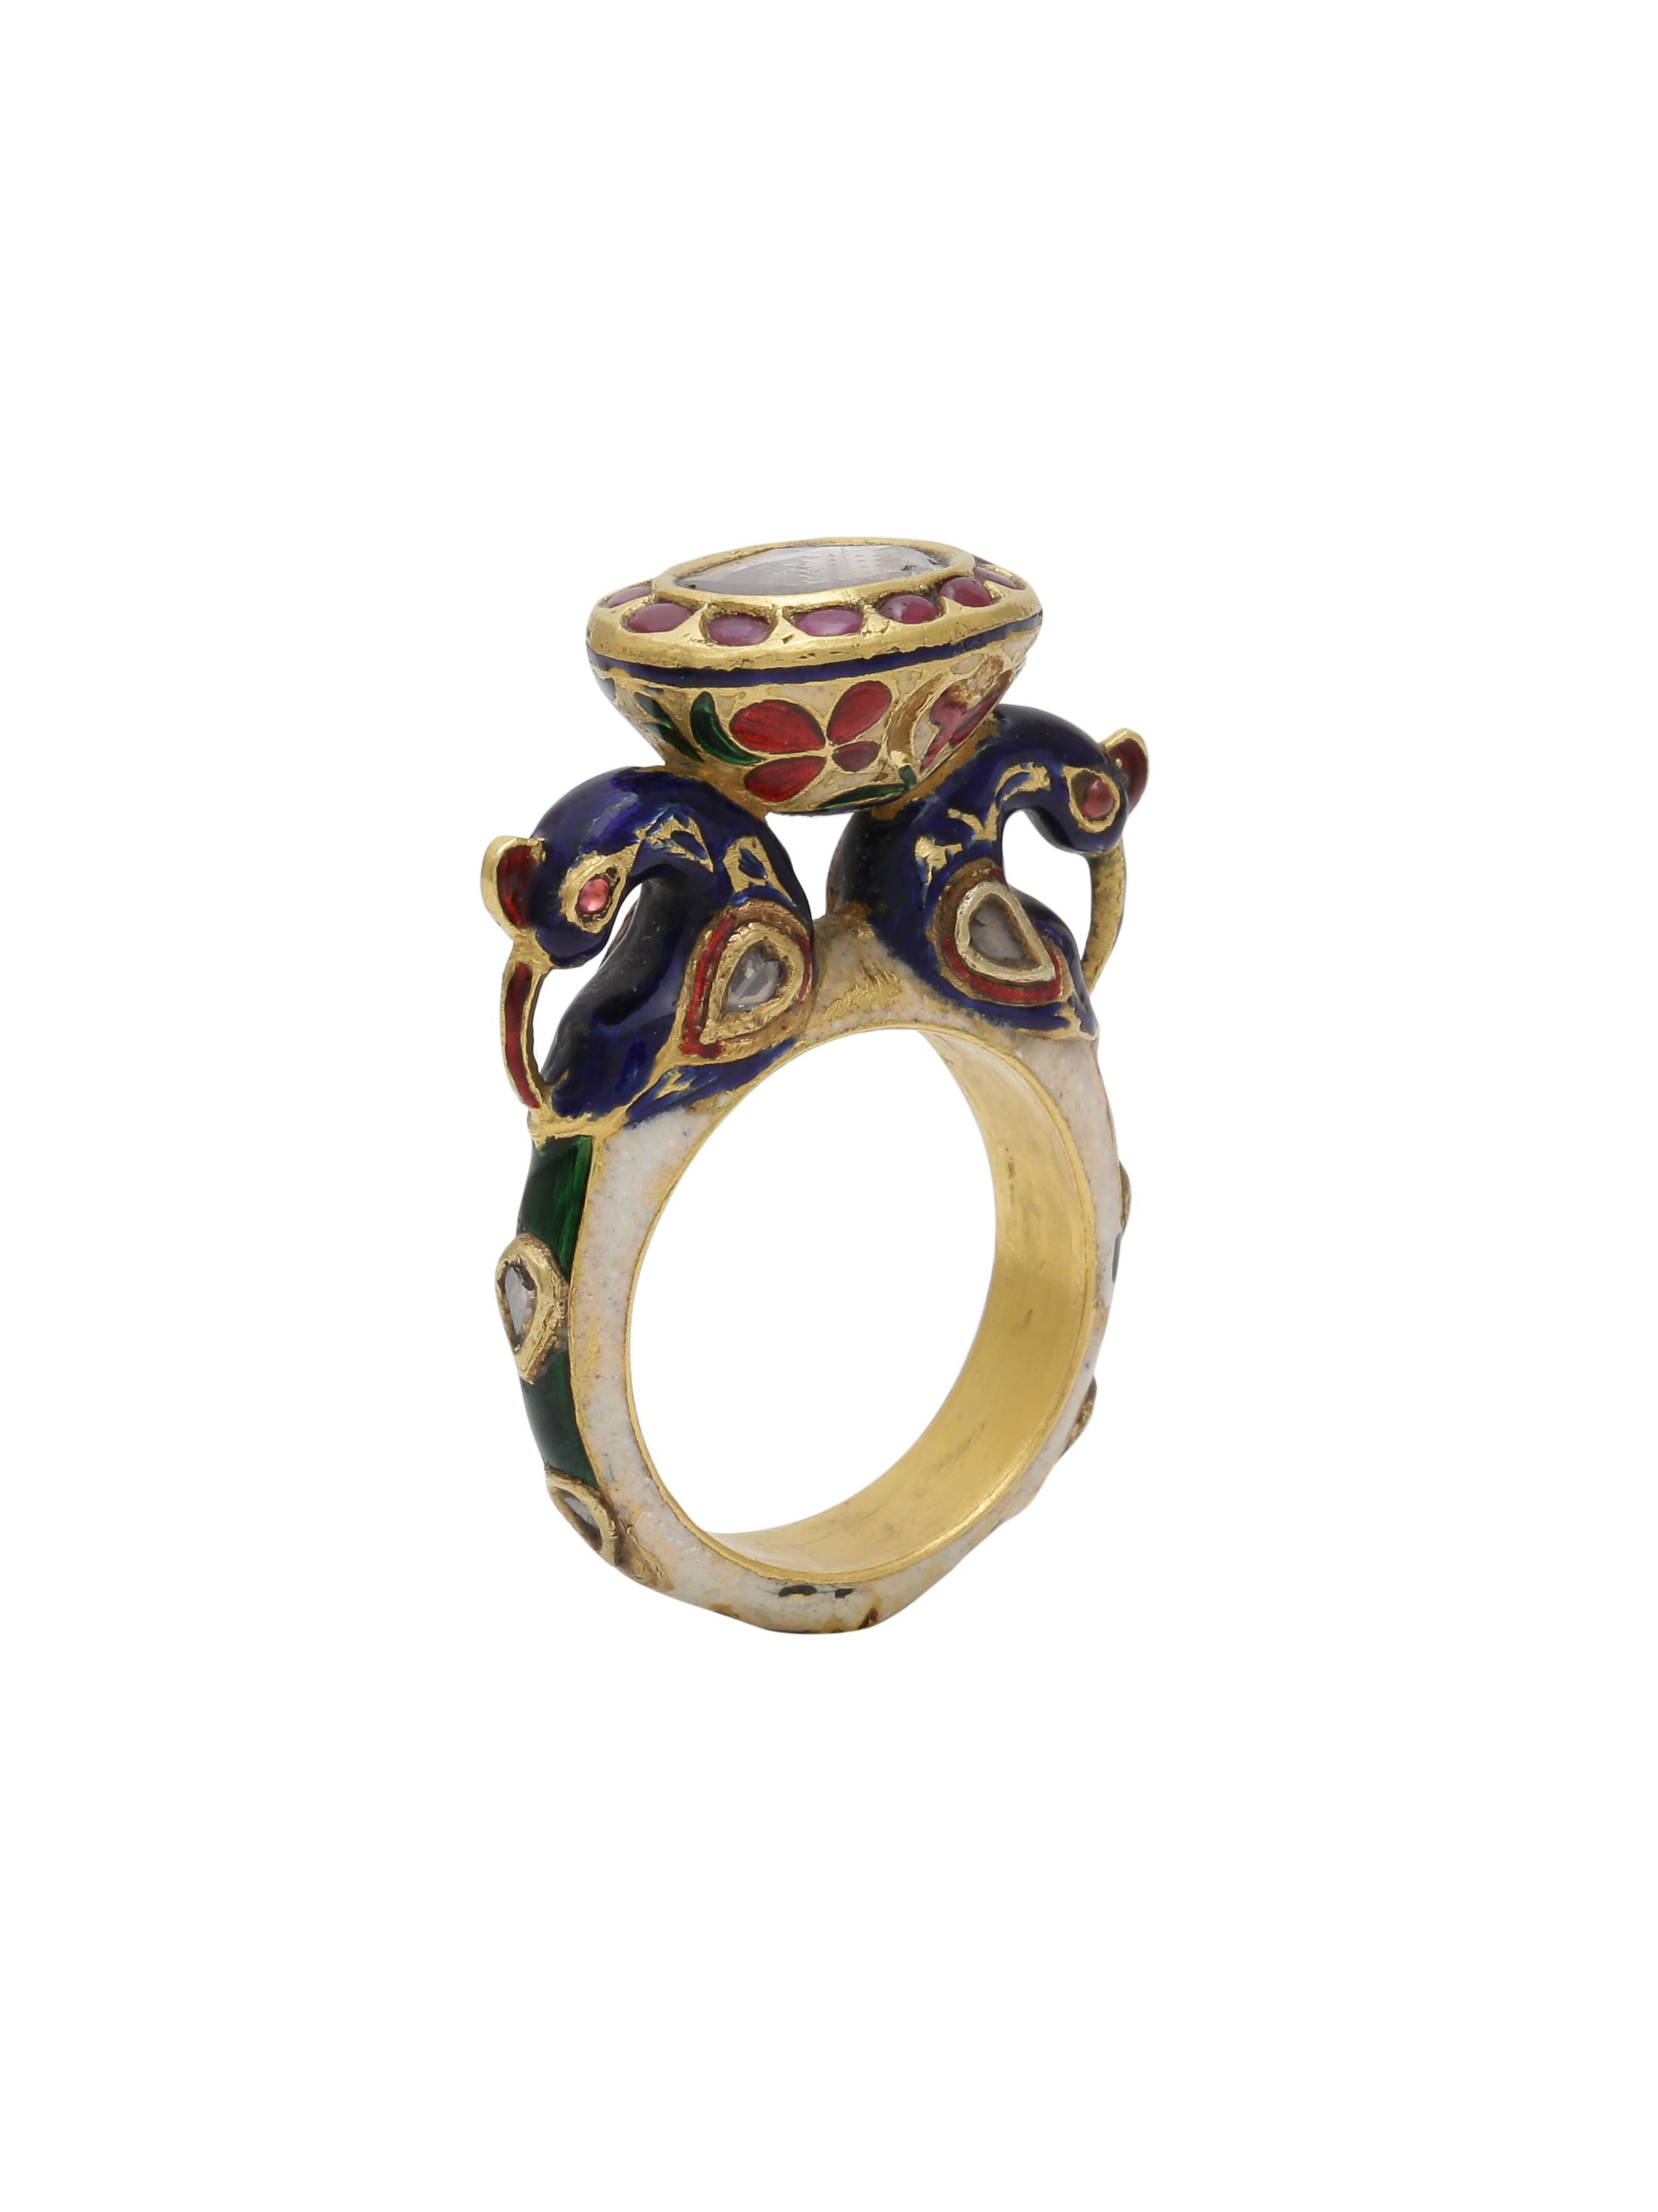 Women's or Men's Statement Peacock Ring with Diamond and Enamel Handcrafted in 18 Karat Gold For Sale